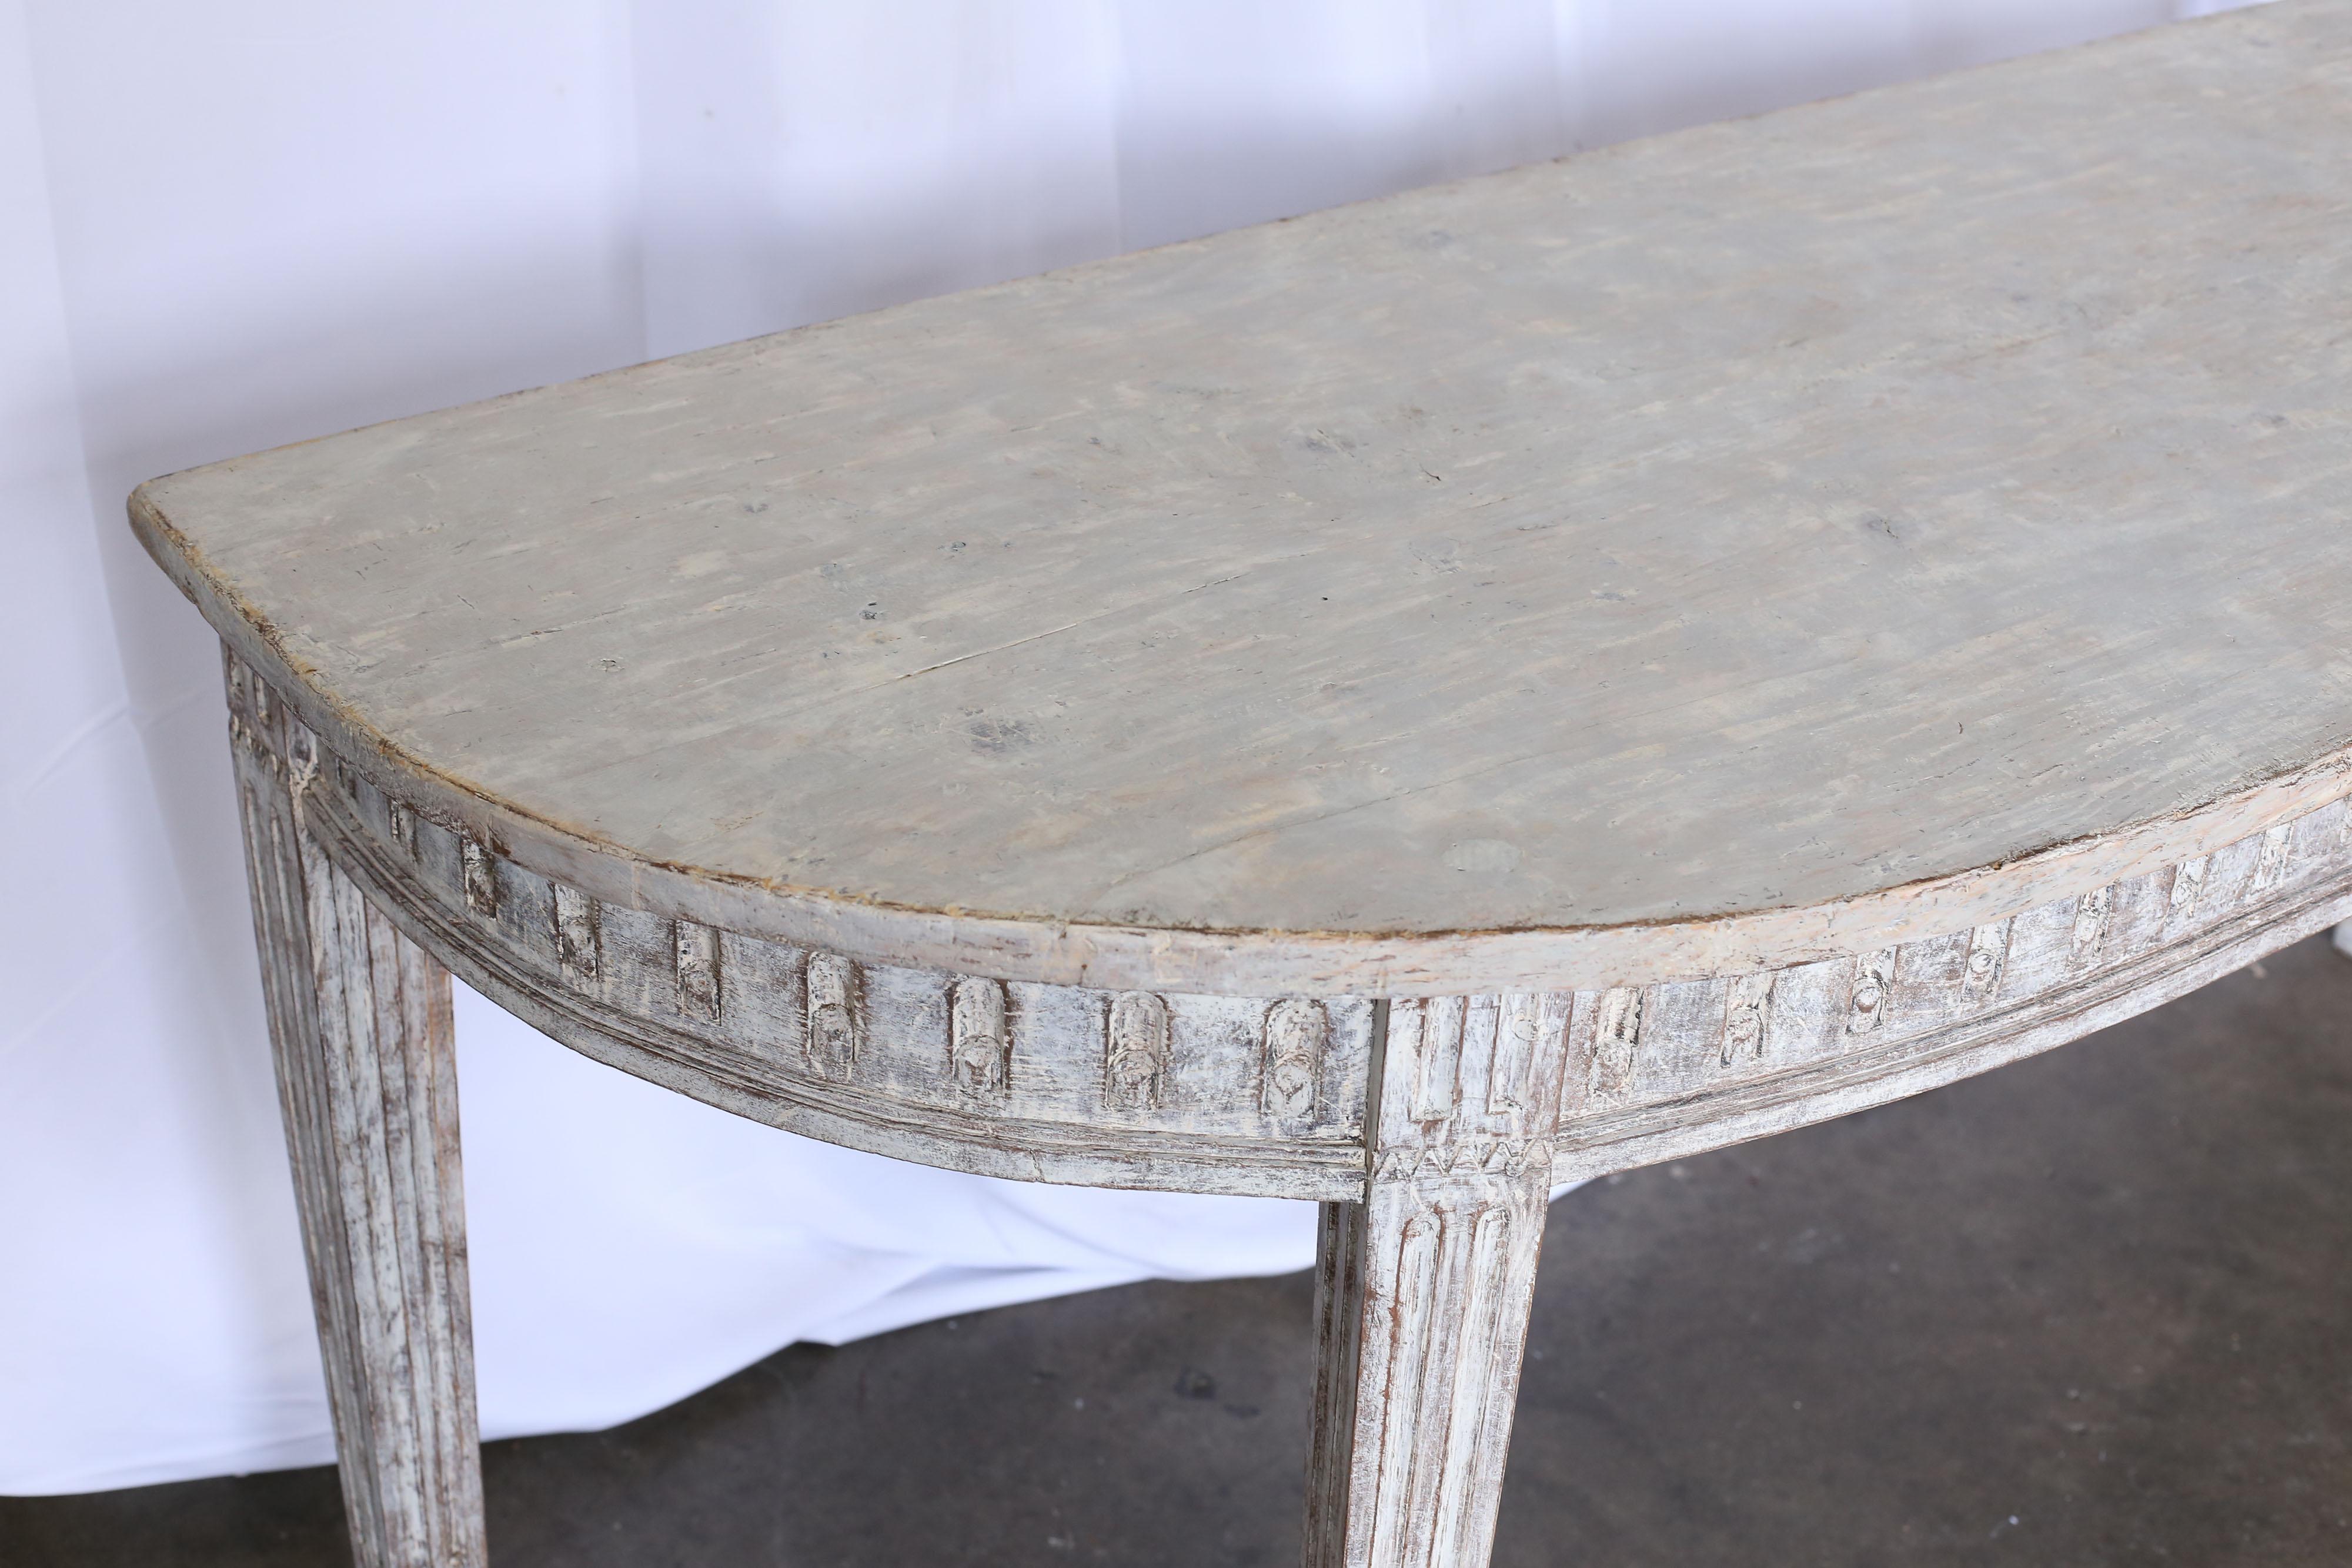 Large 19th century Swedish console or serving table. Table has four legs with a carved detail above each one and a carved detail surrounding the apron. The original paint has been dry-scraped.